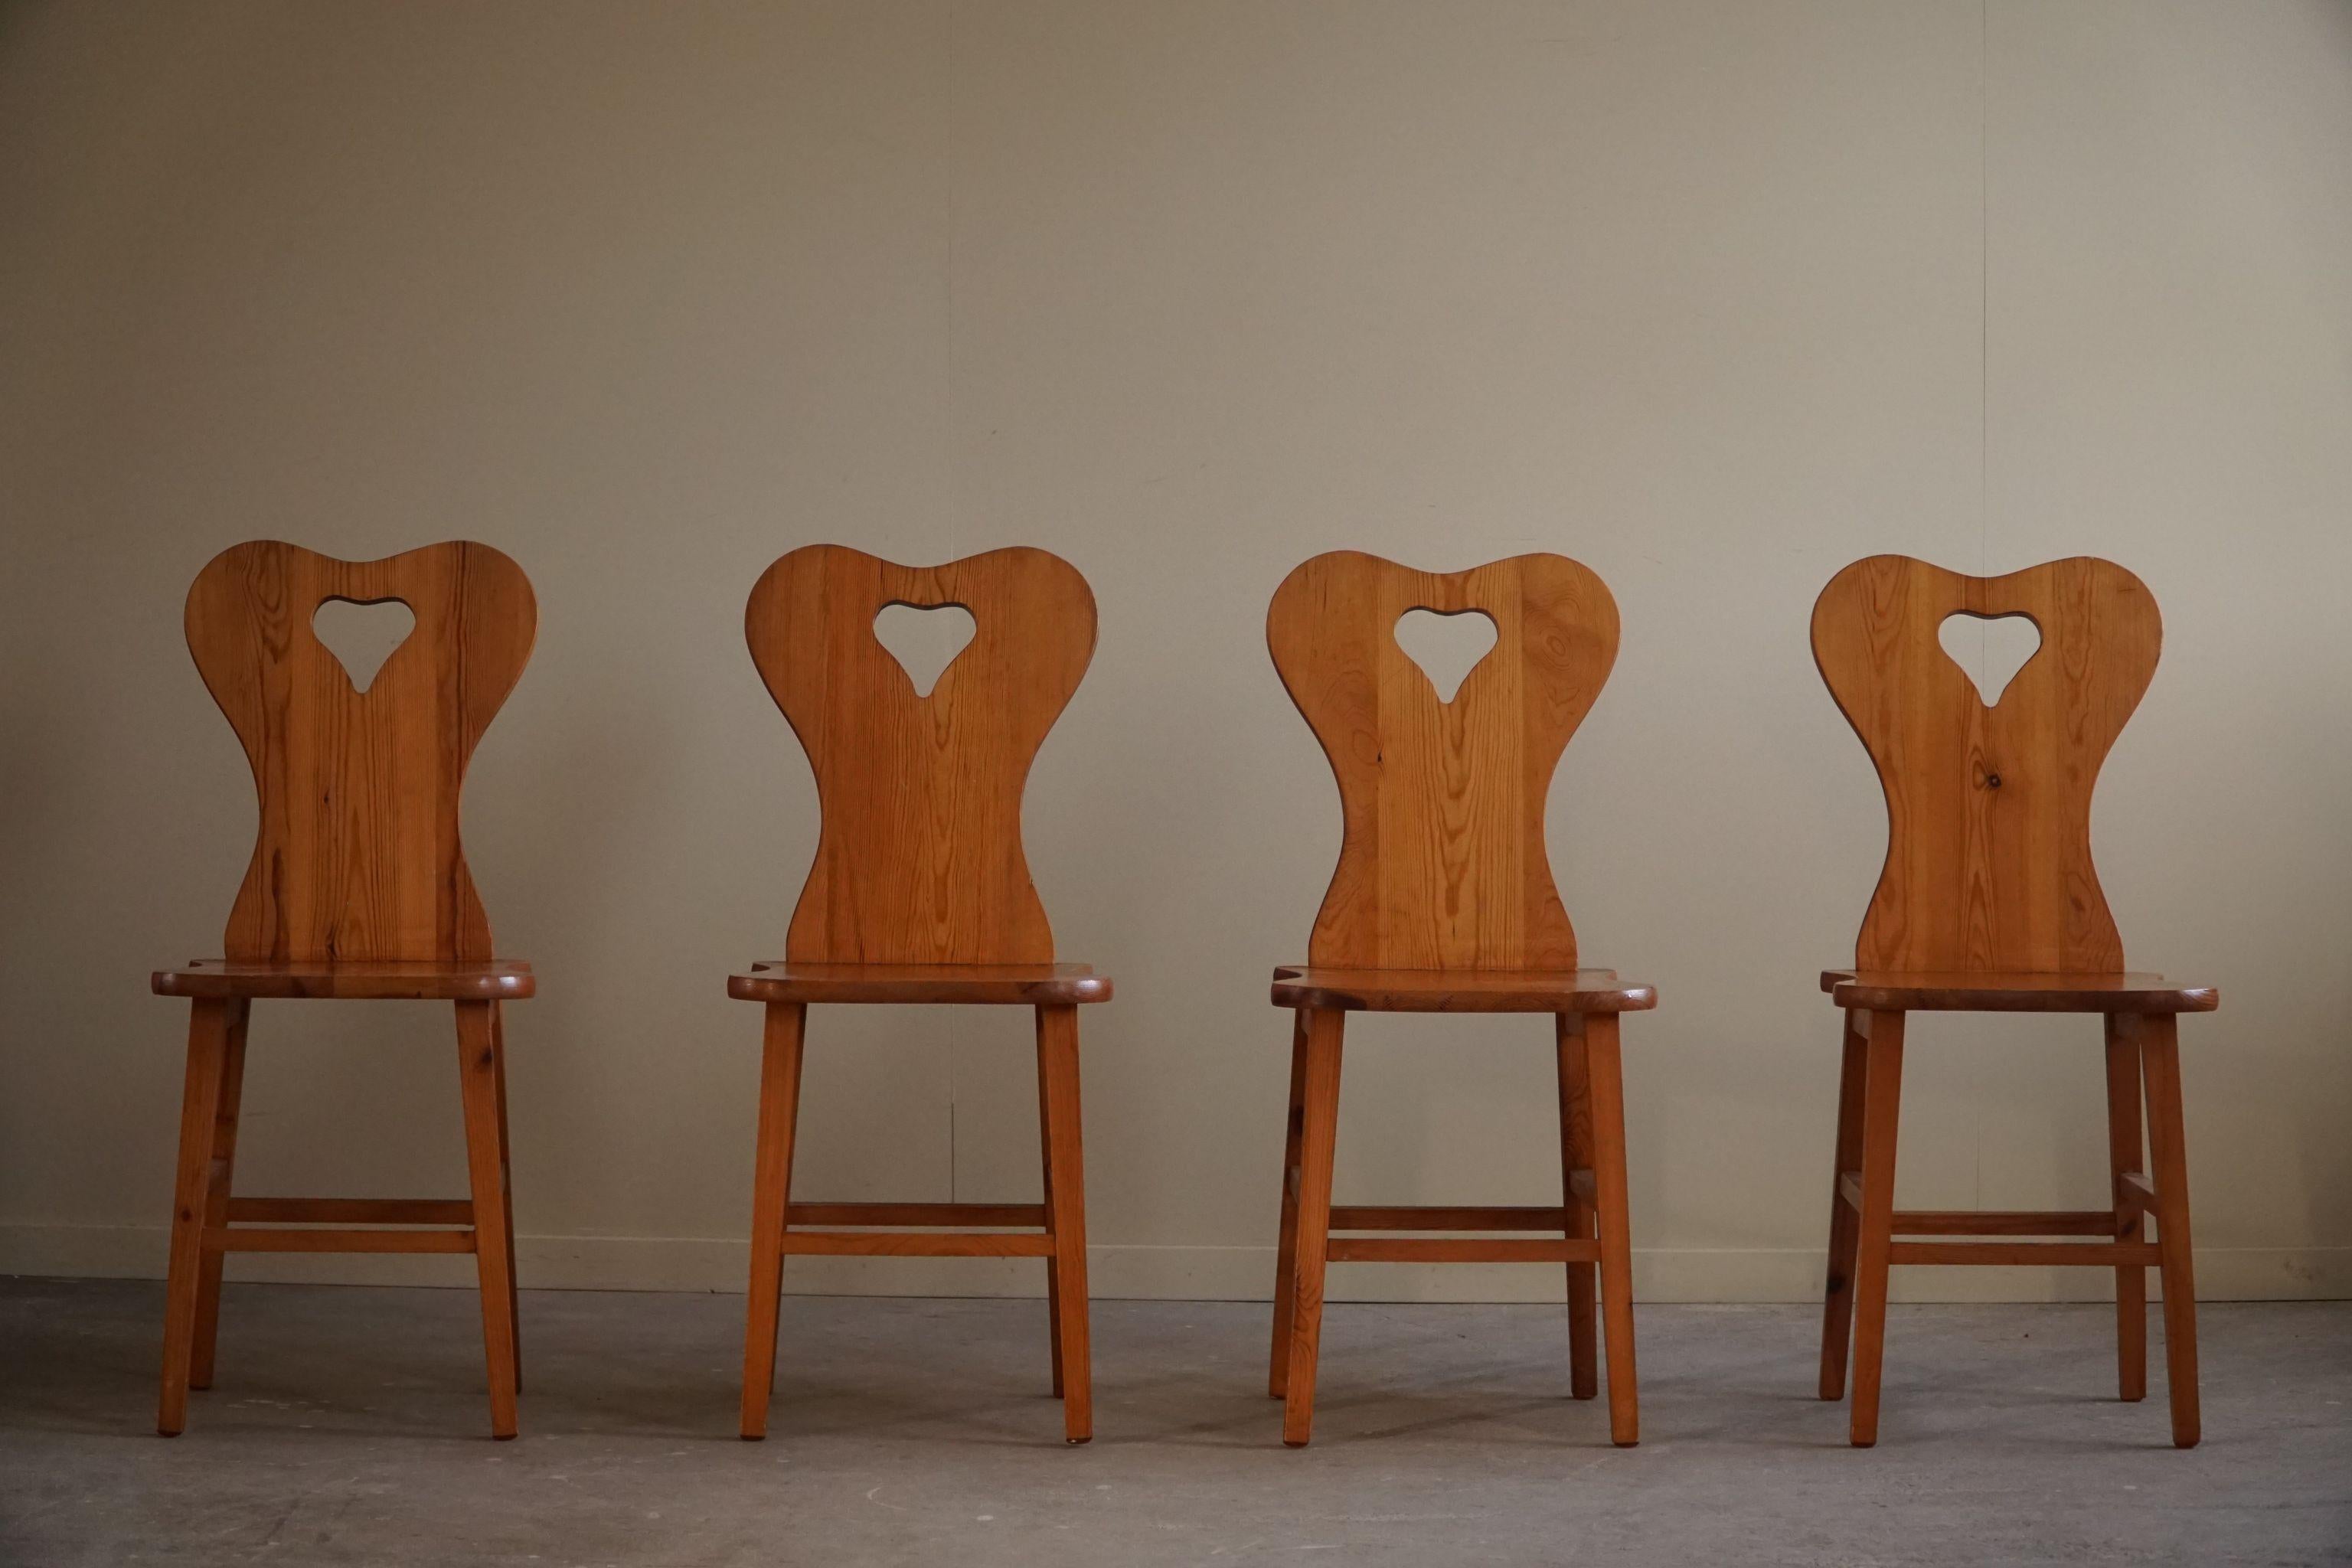 Set of 4 Chairs in Pine, by a Swedish Cabinetmaker, Scandinavian Modern, 1960s For Sale 14